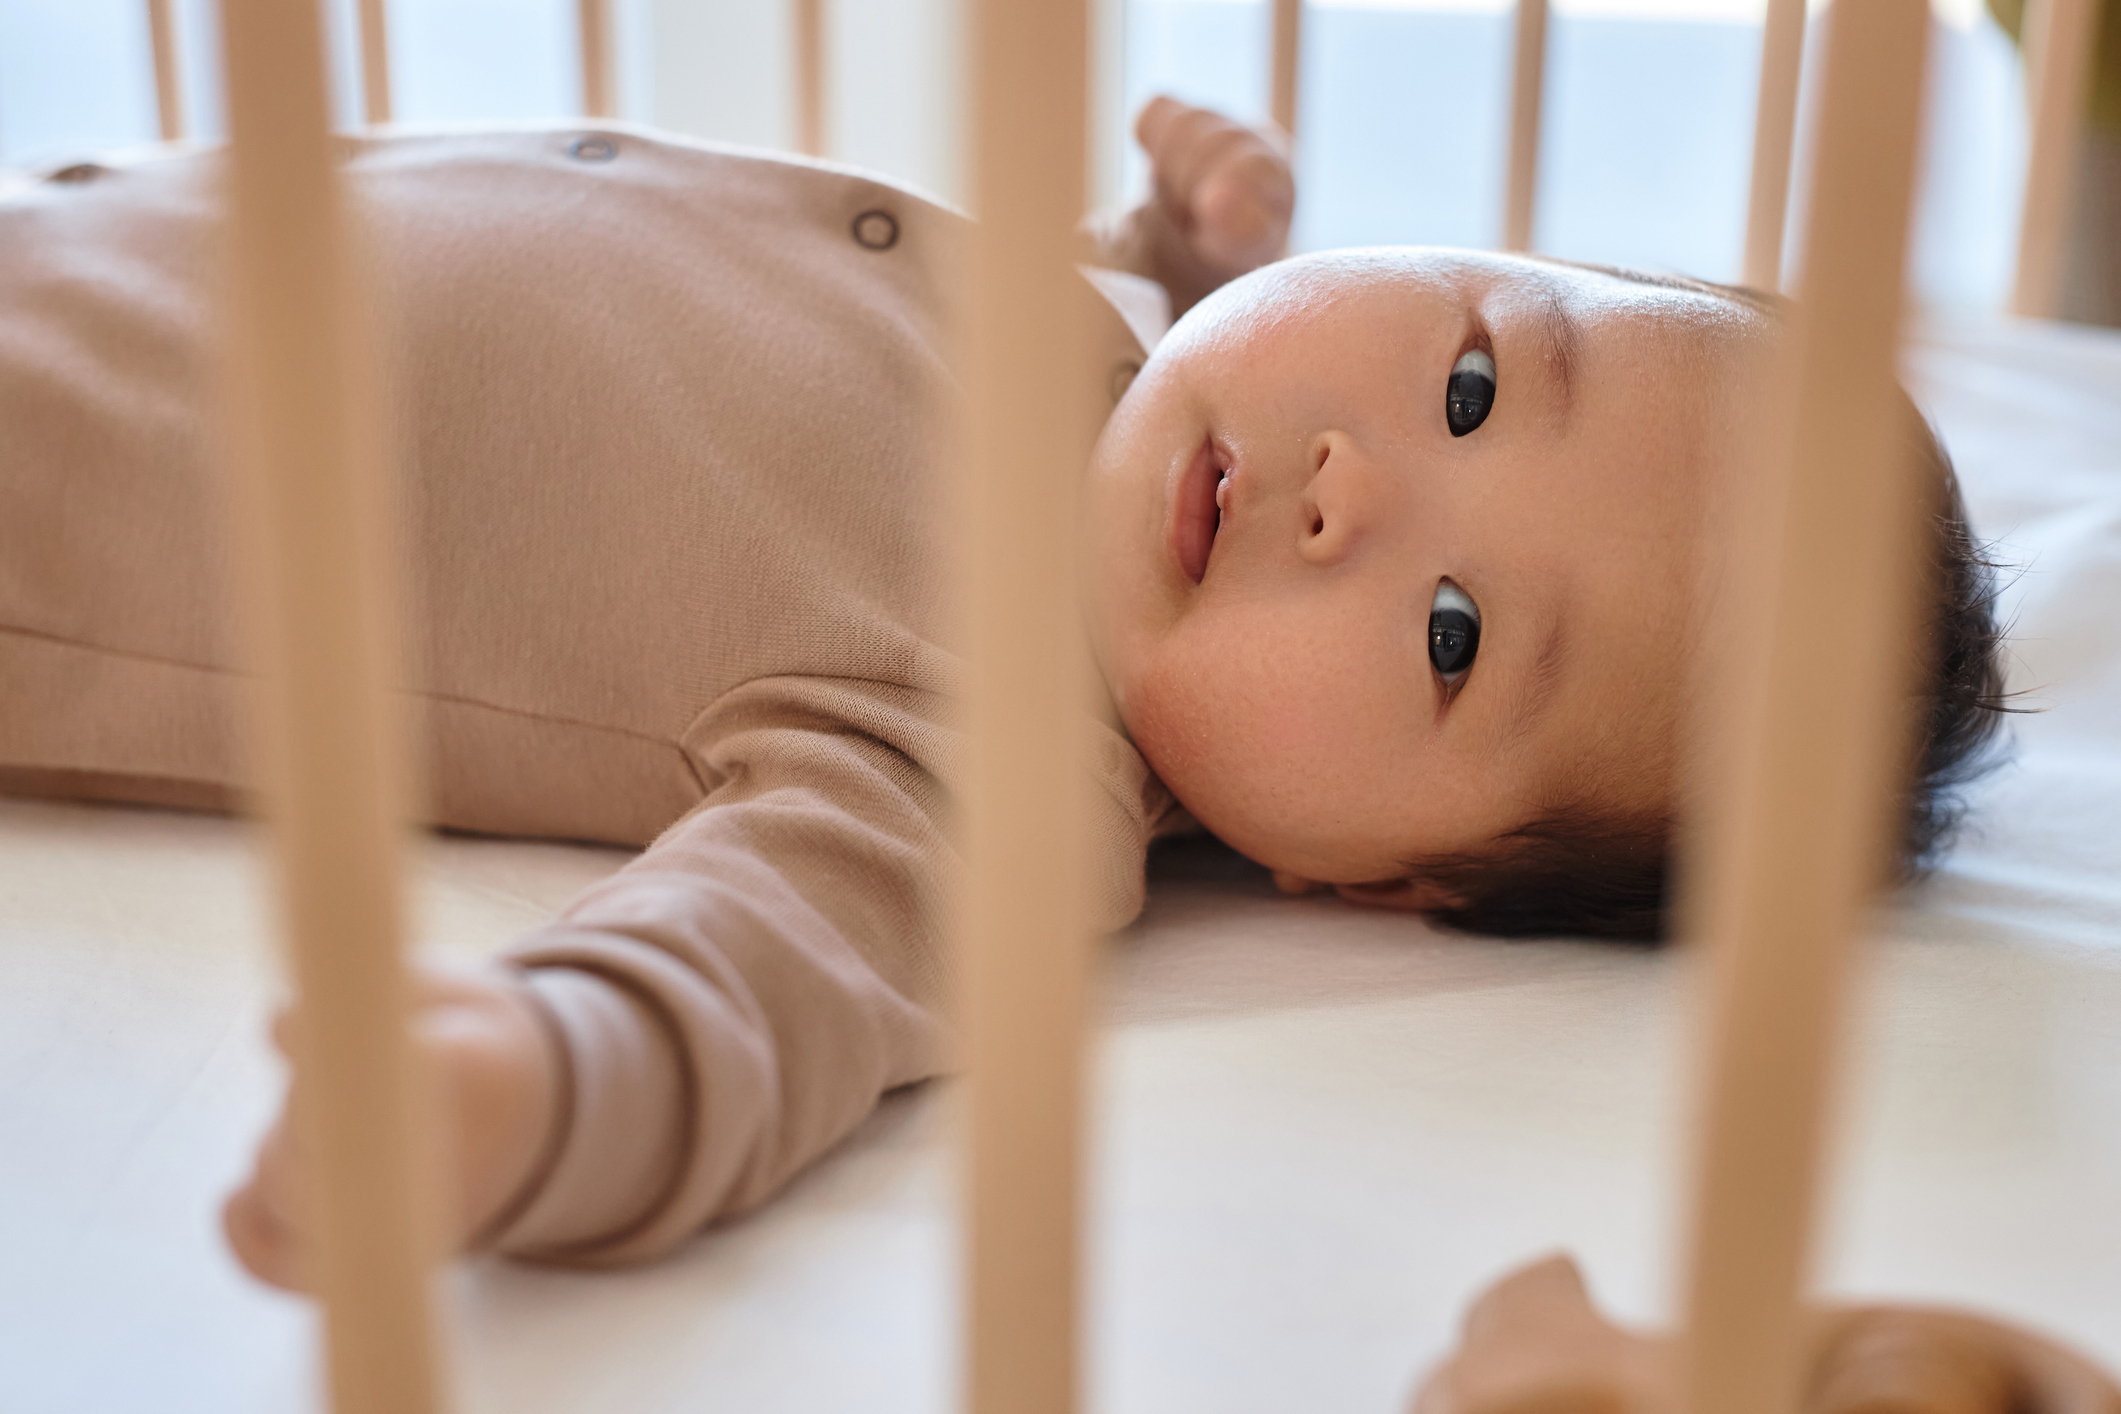 Infant lying in a crib looking towards the camera, image evokes themes of early childhood and nurturing